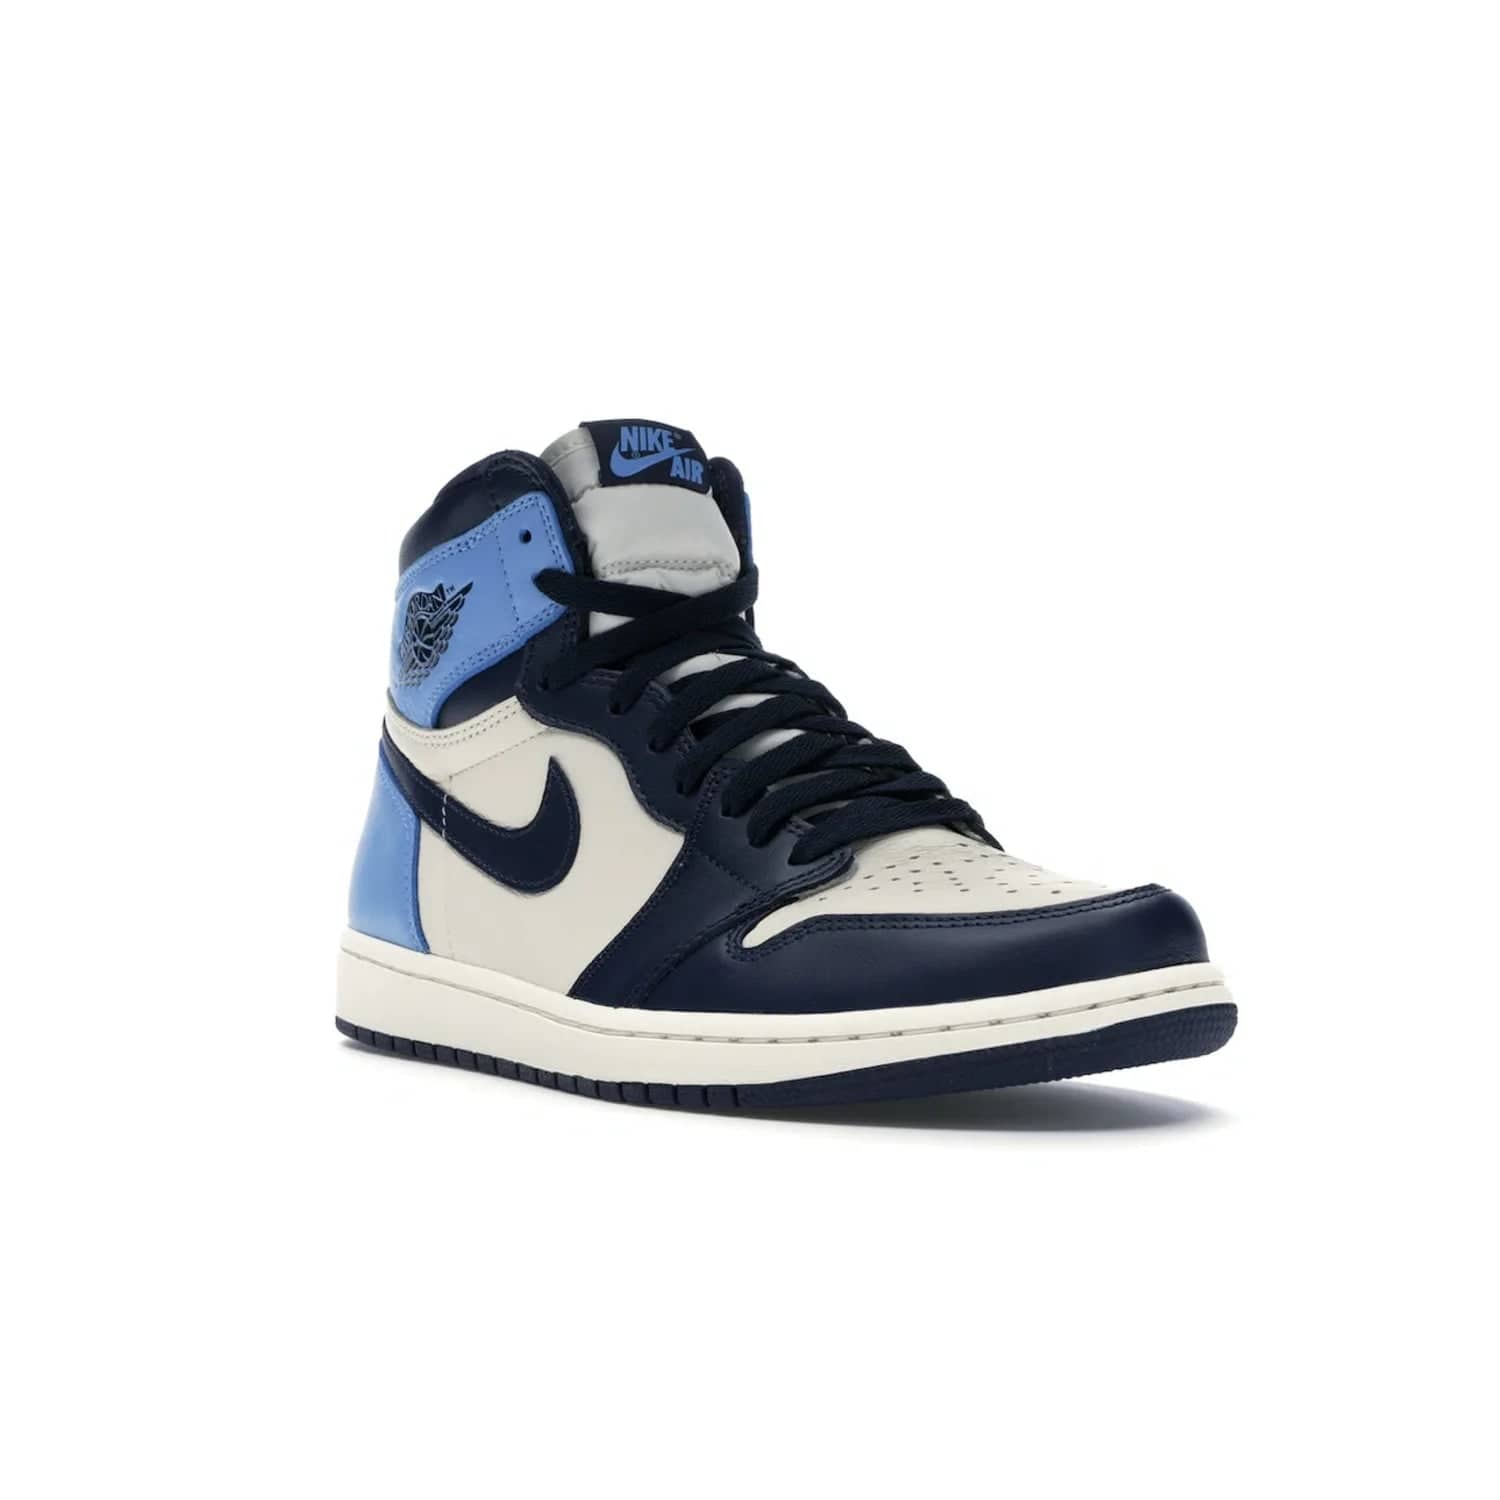 Jordan 1 Retro High Obsidian UNC - Image 6 - Only at www.BallersClubKickz.com - Bring a timeless classic to your wardrobe with the Air Jordan 1 Retro High "Obsidian/University Blue”. A full leather upper combines Obsidian and University Blue detailing for a retro Jordan style. Stitched Jumpman logo pays tribute to UNC. Experience classic style with a timeless sneaker.